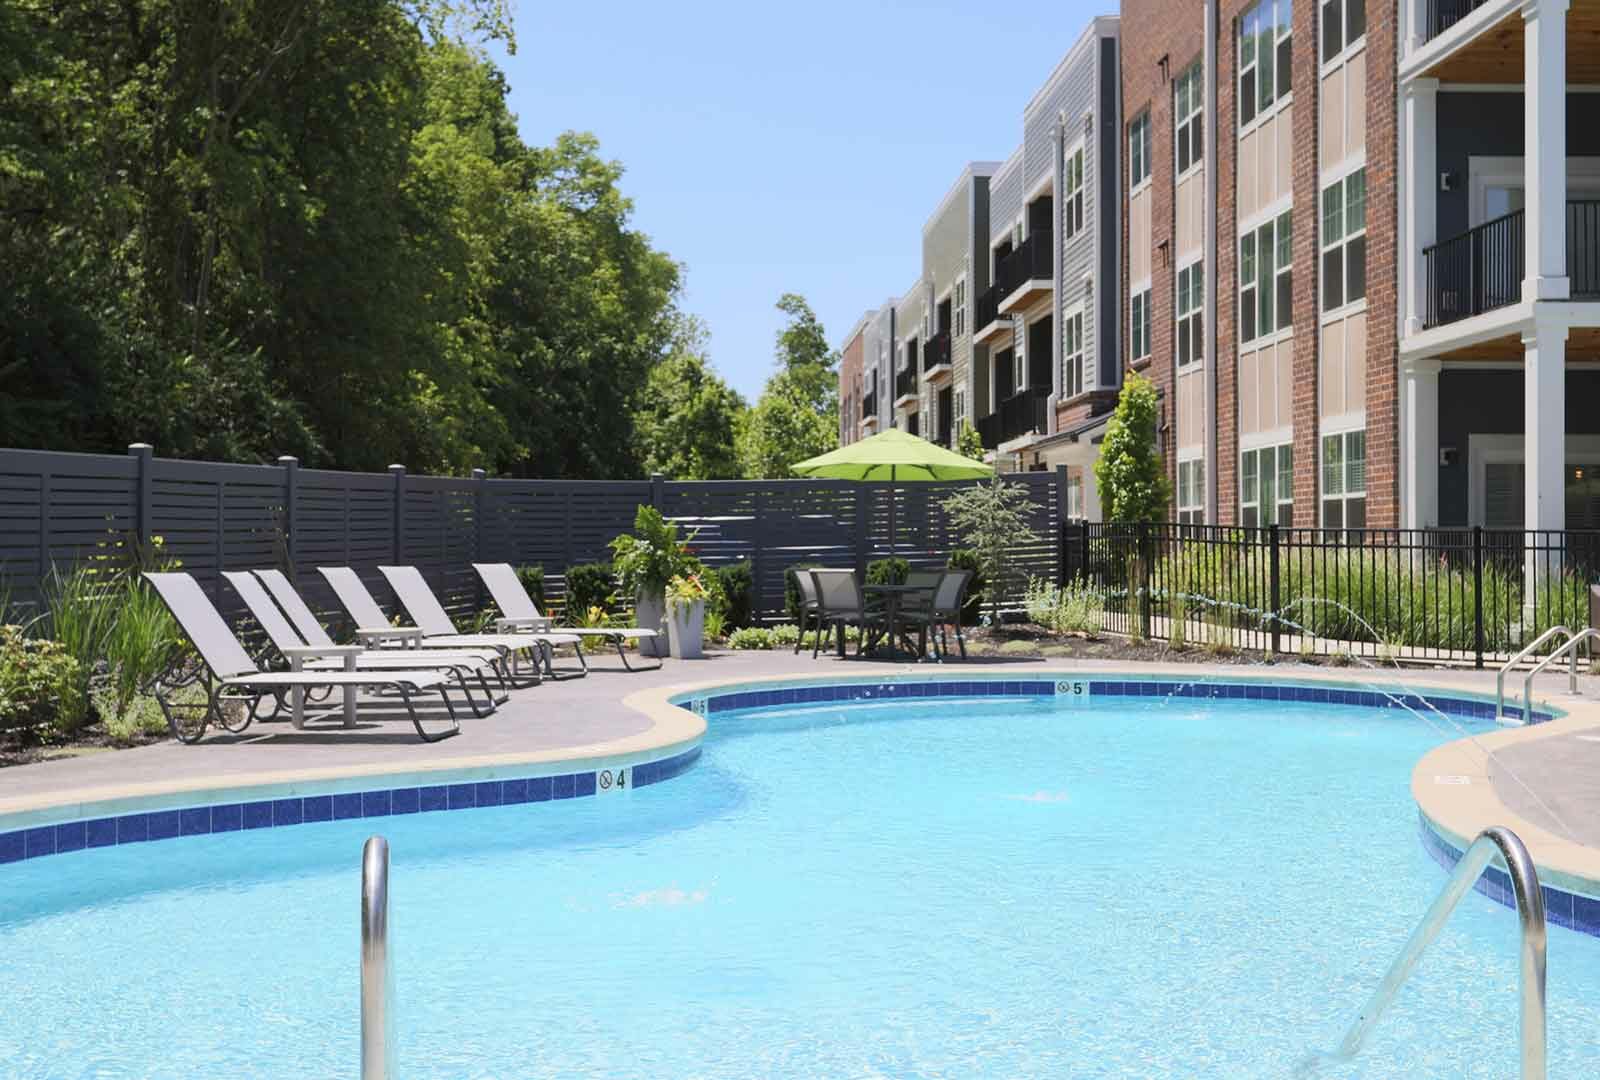 Outdoor pool and lounge area at Element Oakwood.